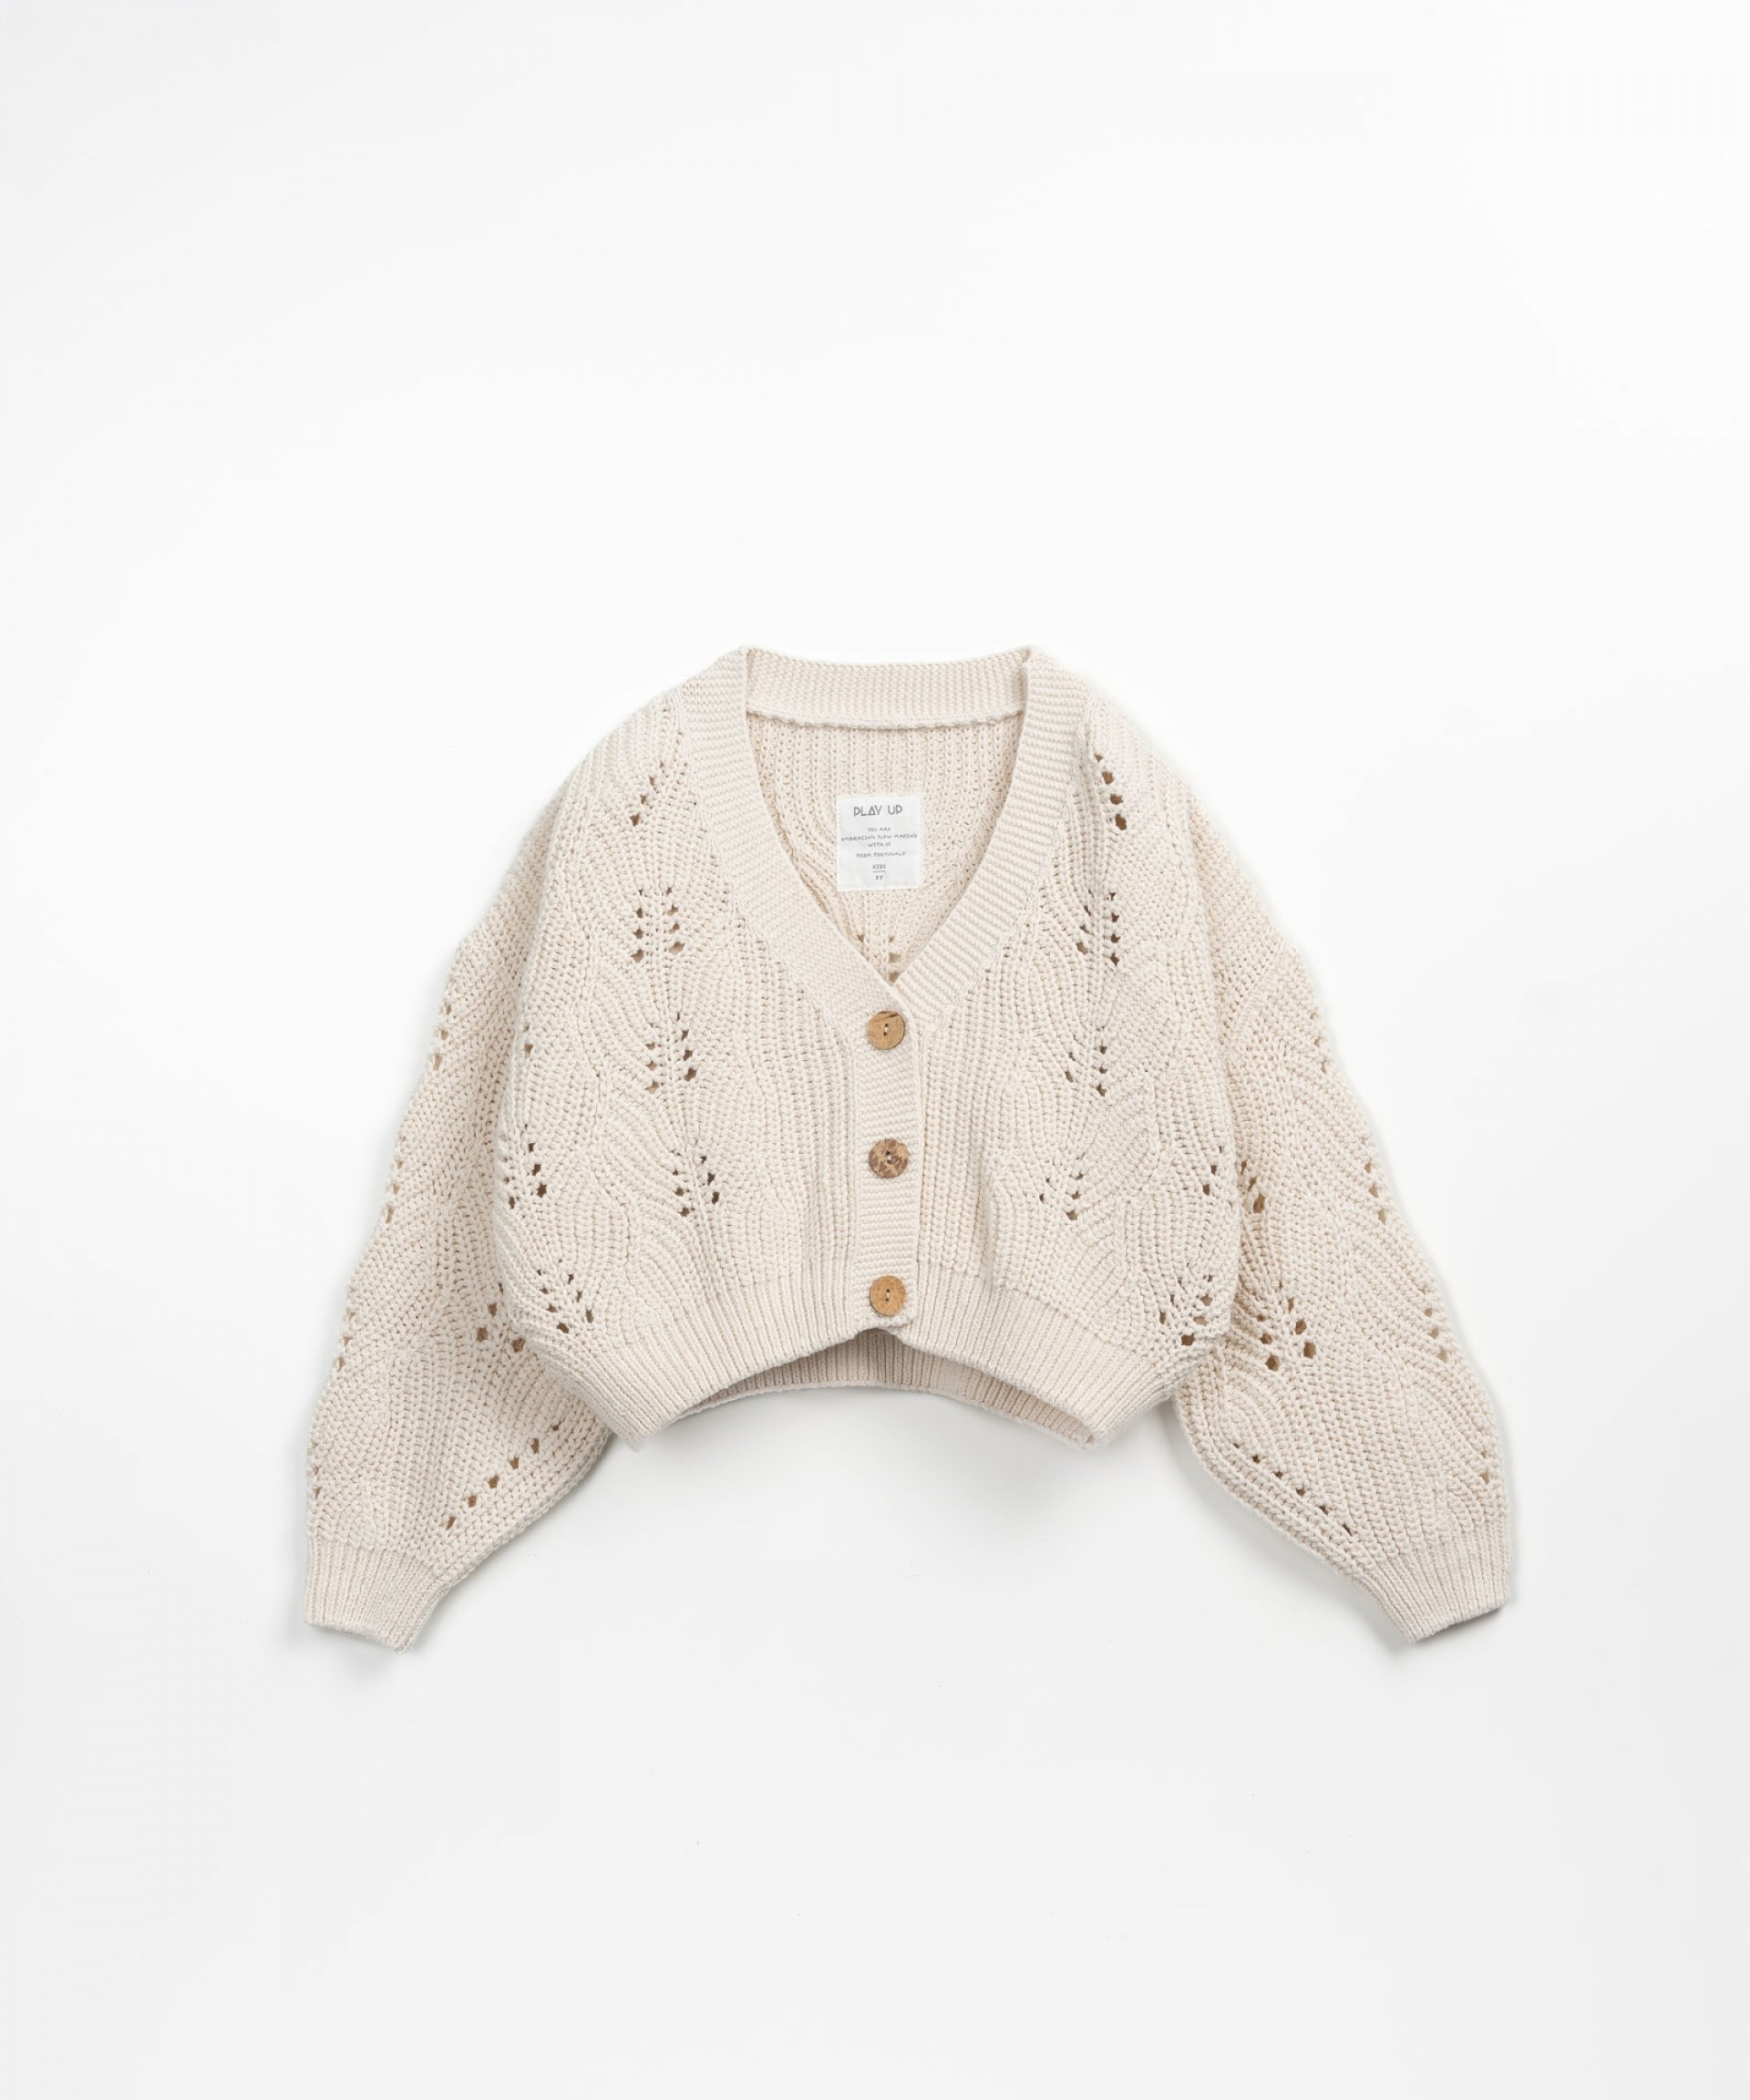 Knitted cardigan made of recycled fibres | Textile Art